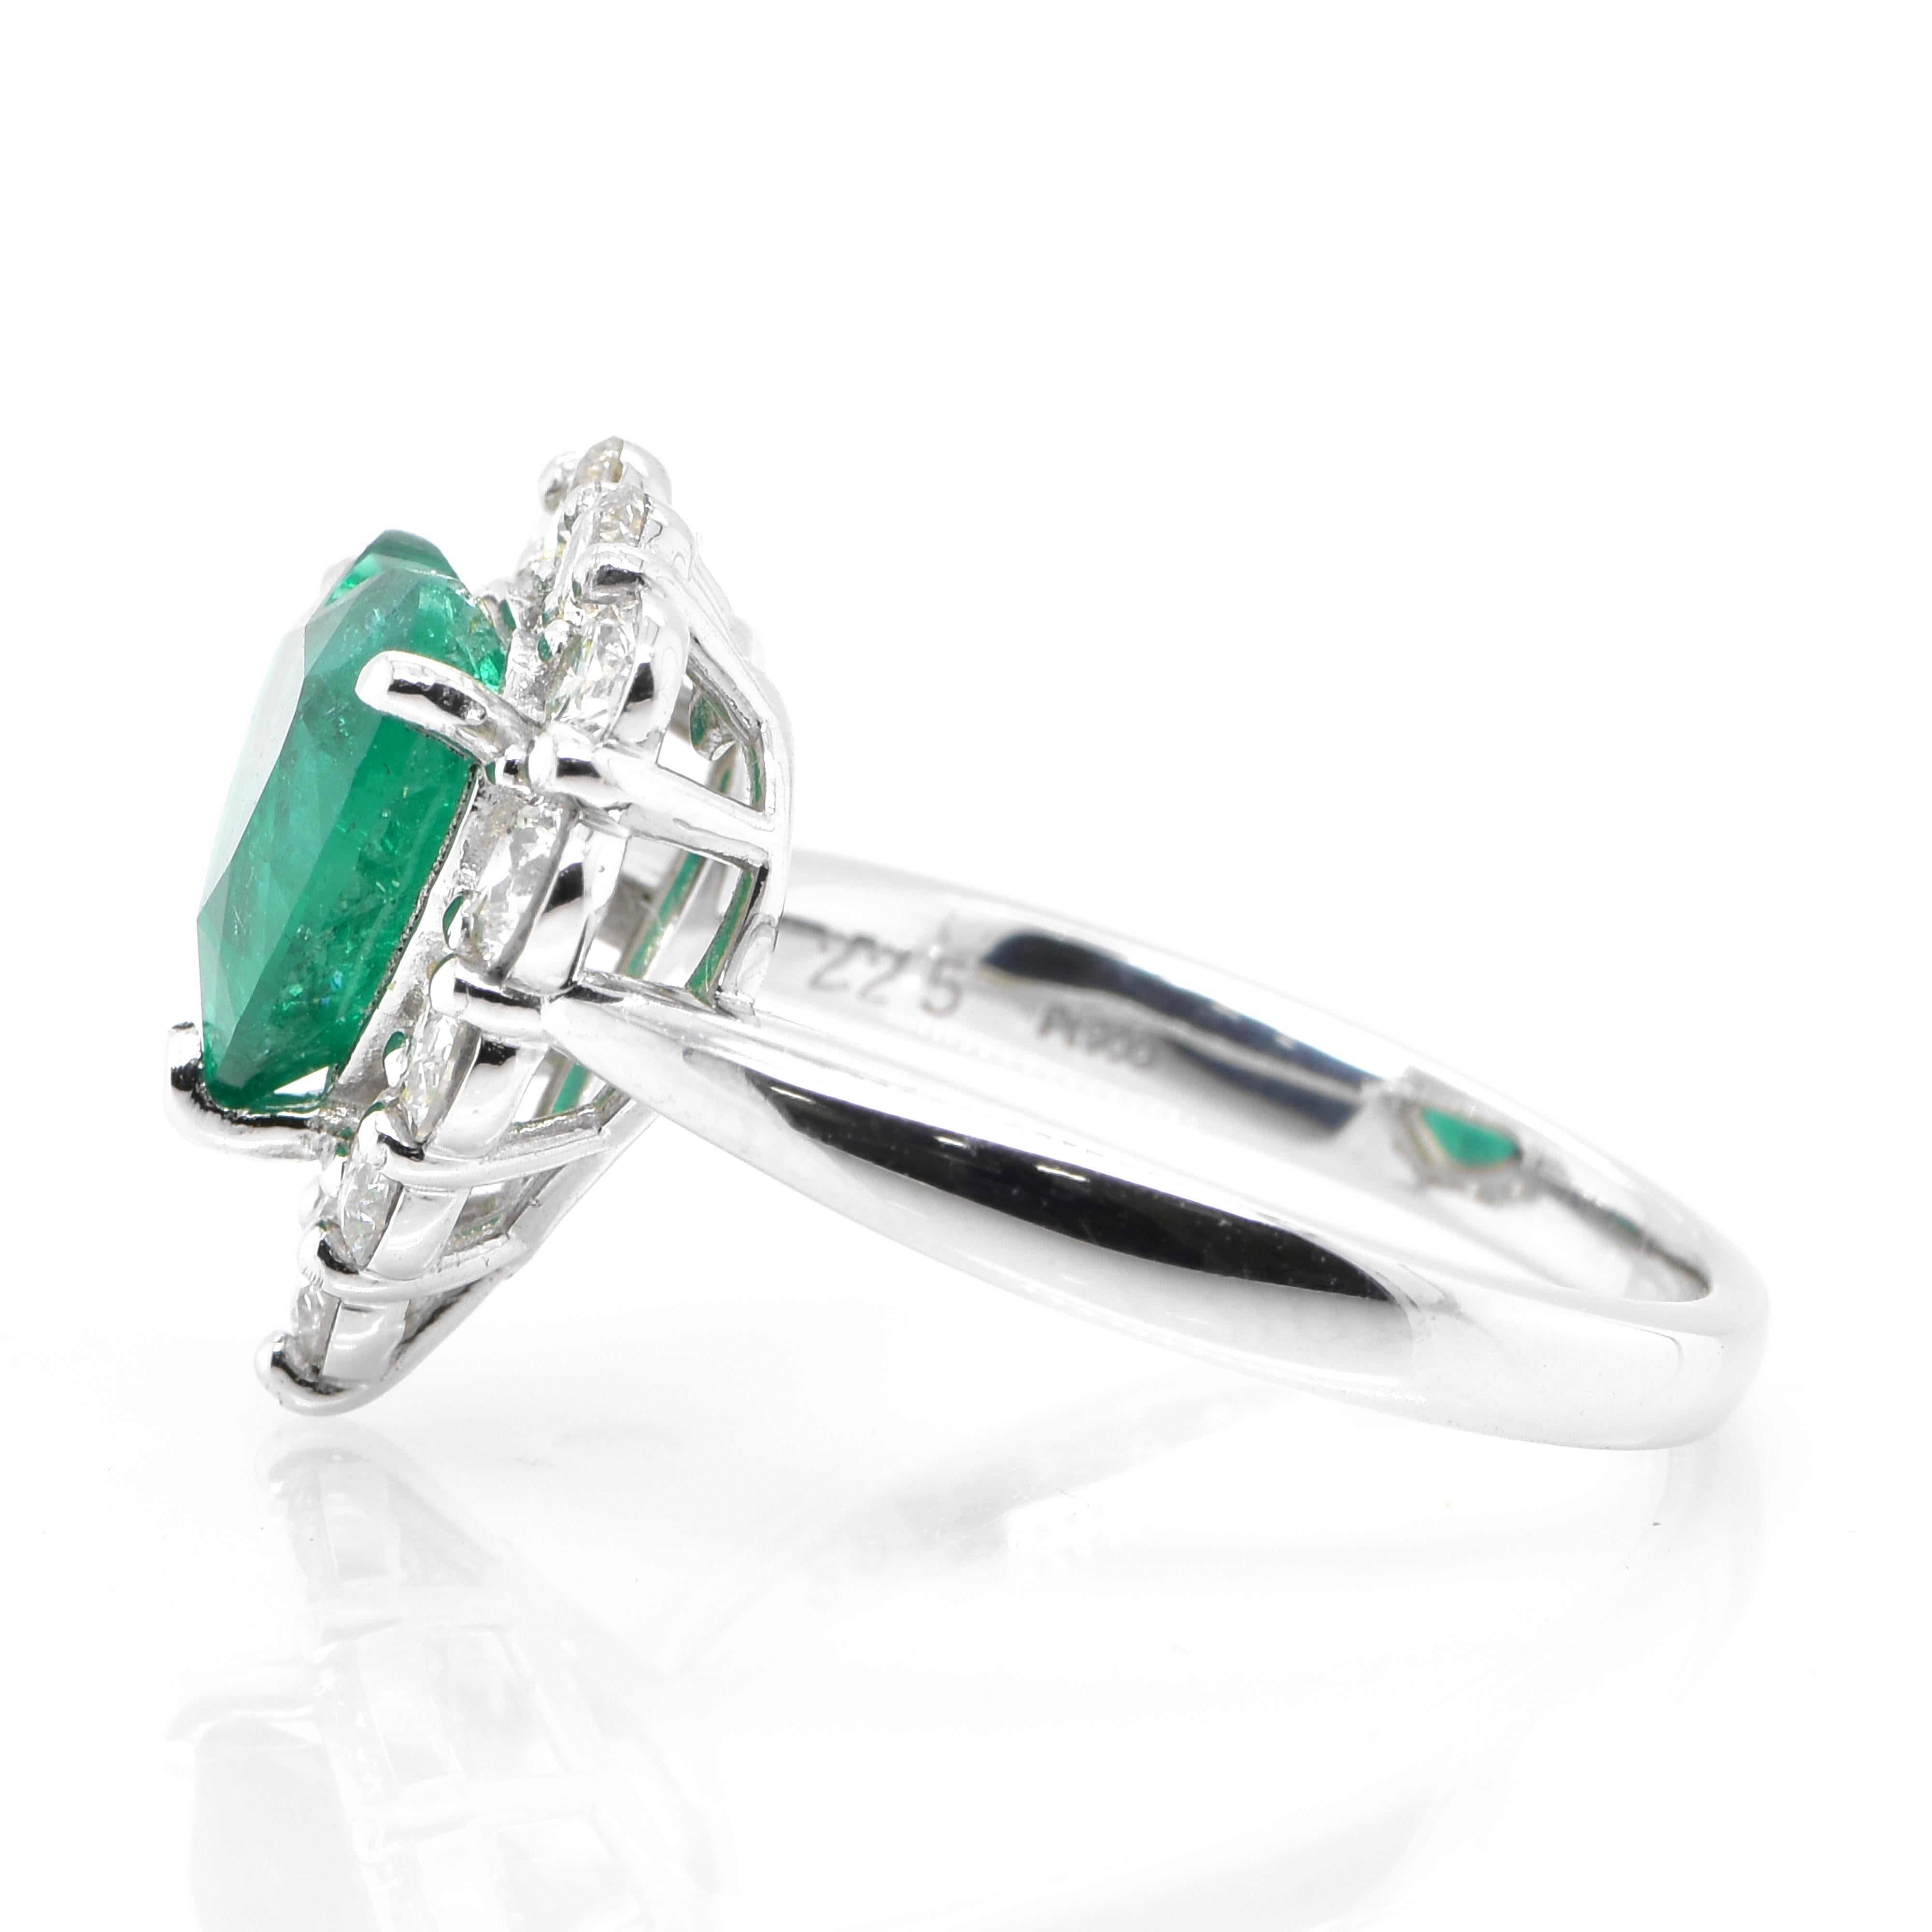 Emerald Cut GIA Certified 2.25 Carat Heart Shape Colombian Emerald Ring Set in Platinum For Sale